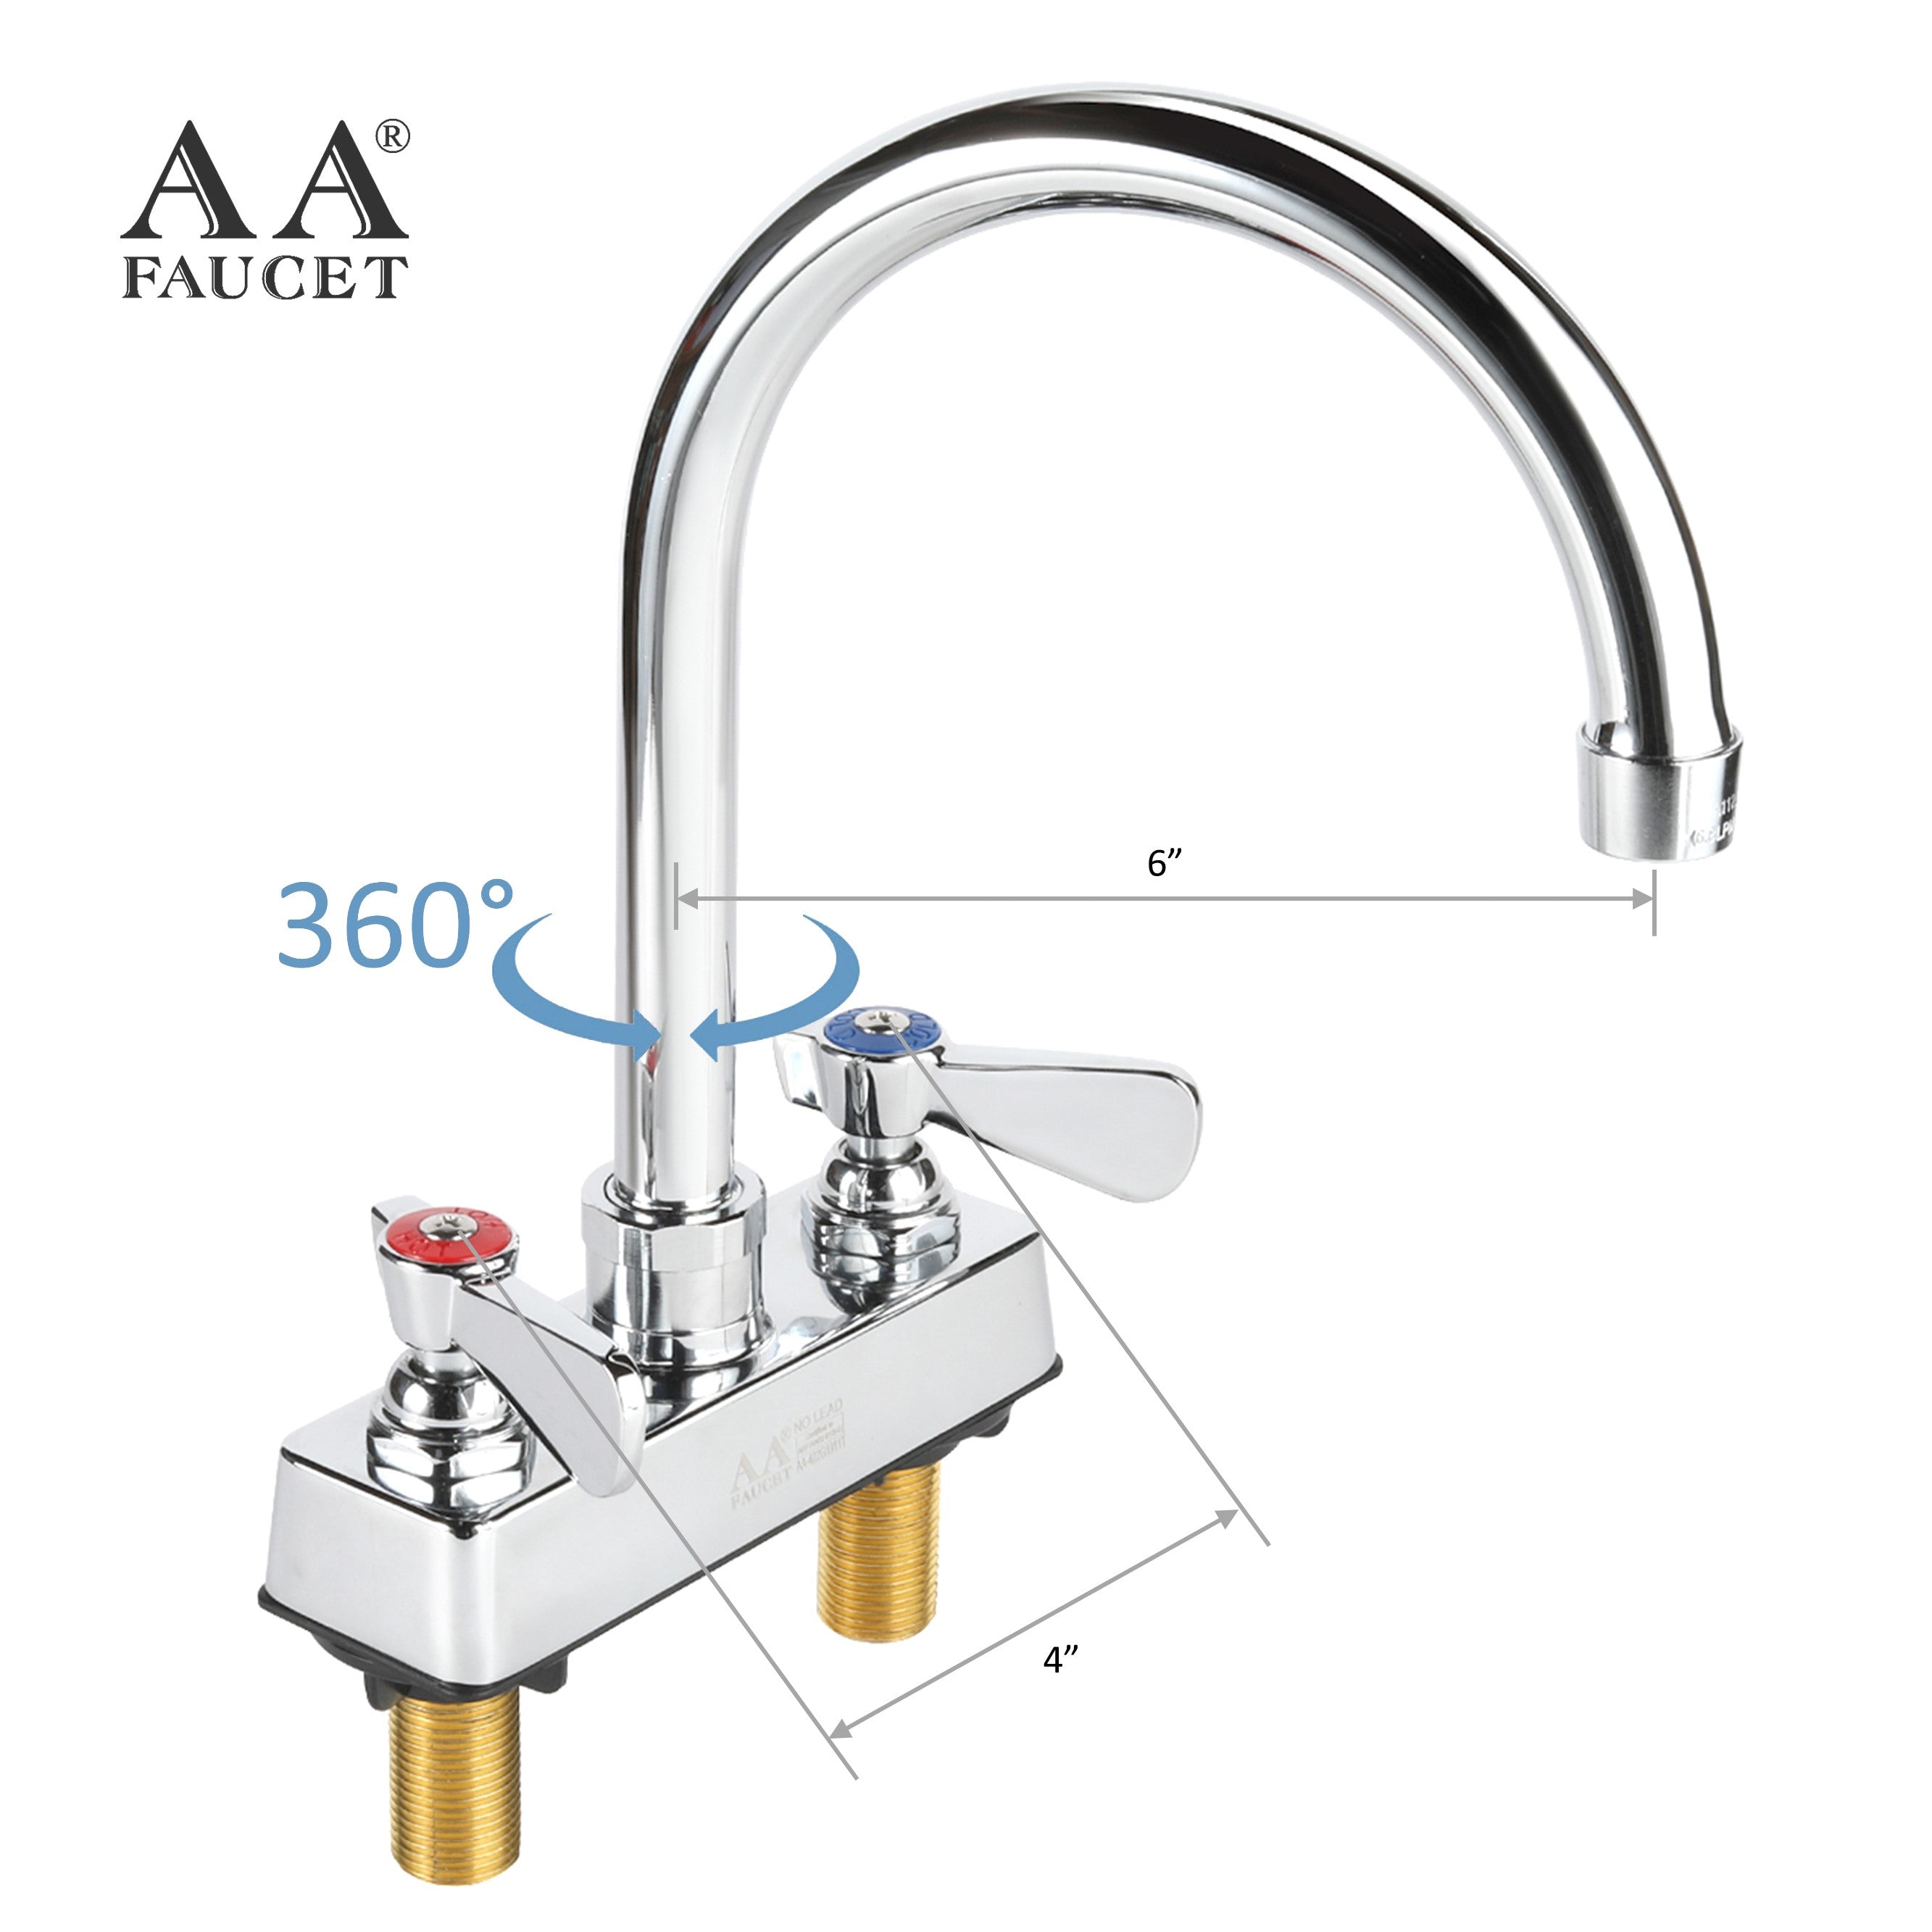 AA Faucet 4" Deck Mount Commercial Bar Sink Faucet with 6" Gooseneck Spout, Brass Construction Chrome Polished for Restaurant Kitchen NSF Approved